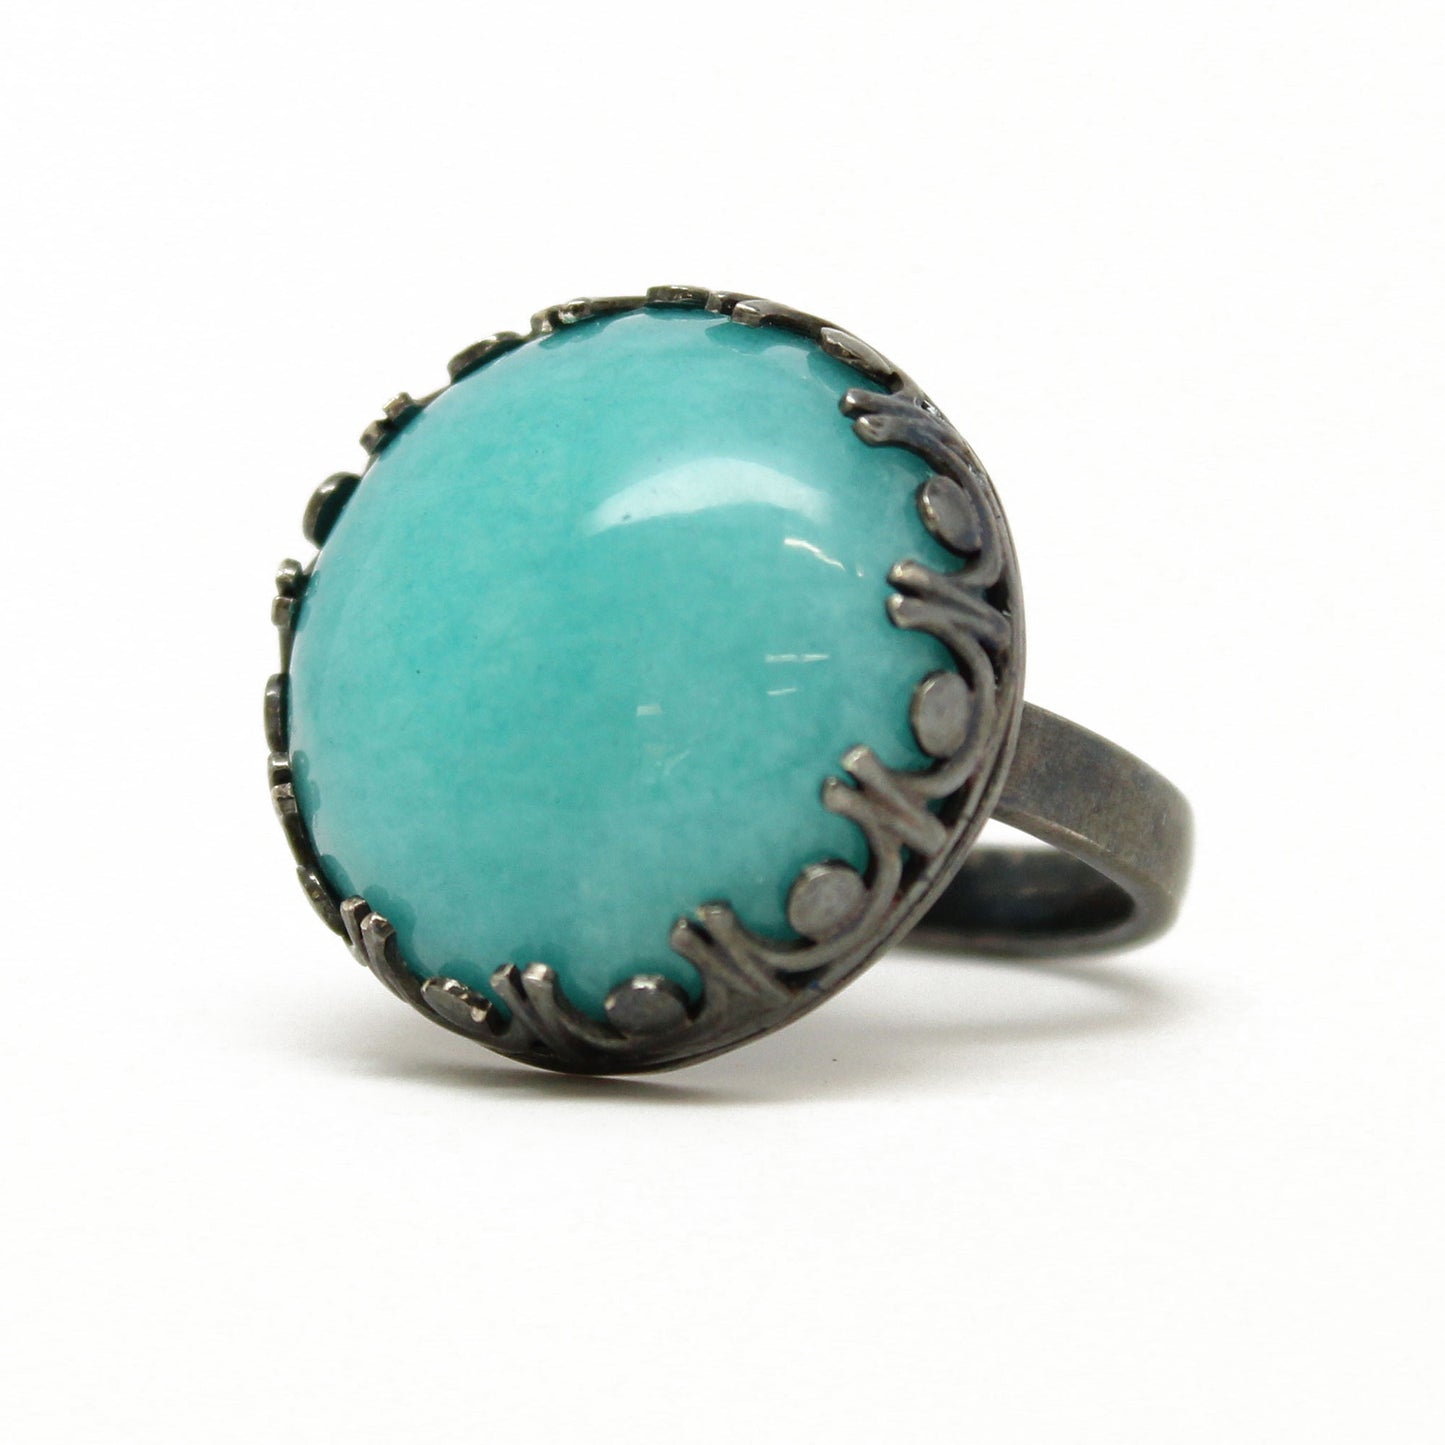 Artisan made Amazonite Ring, Large 20mm Bezel Set in Sterling Silver